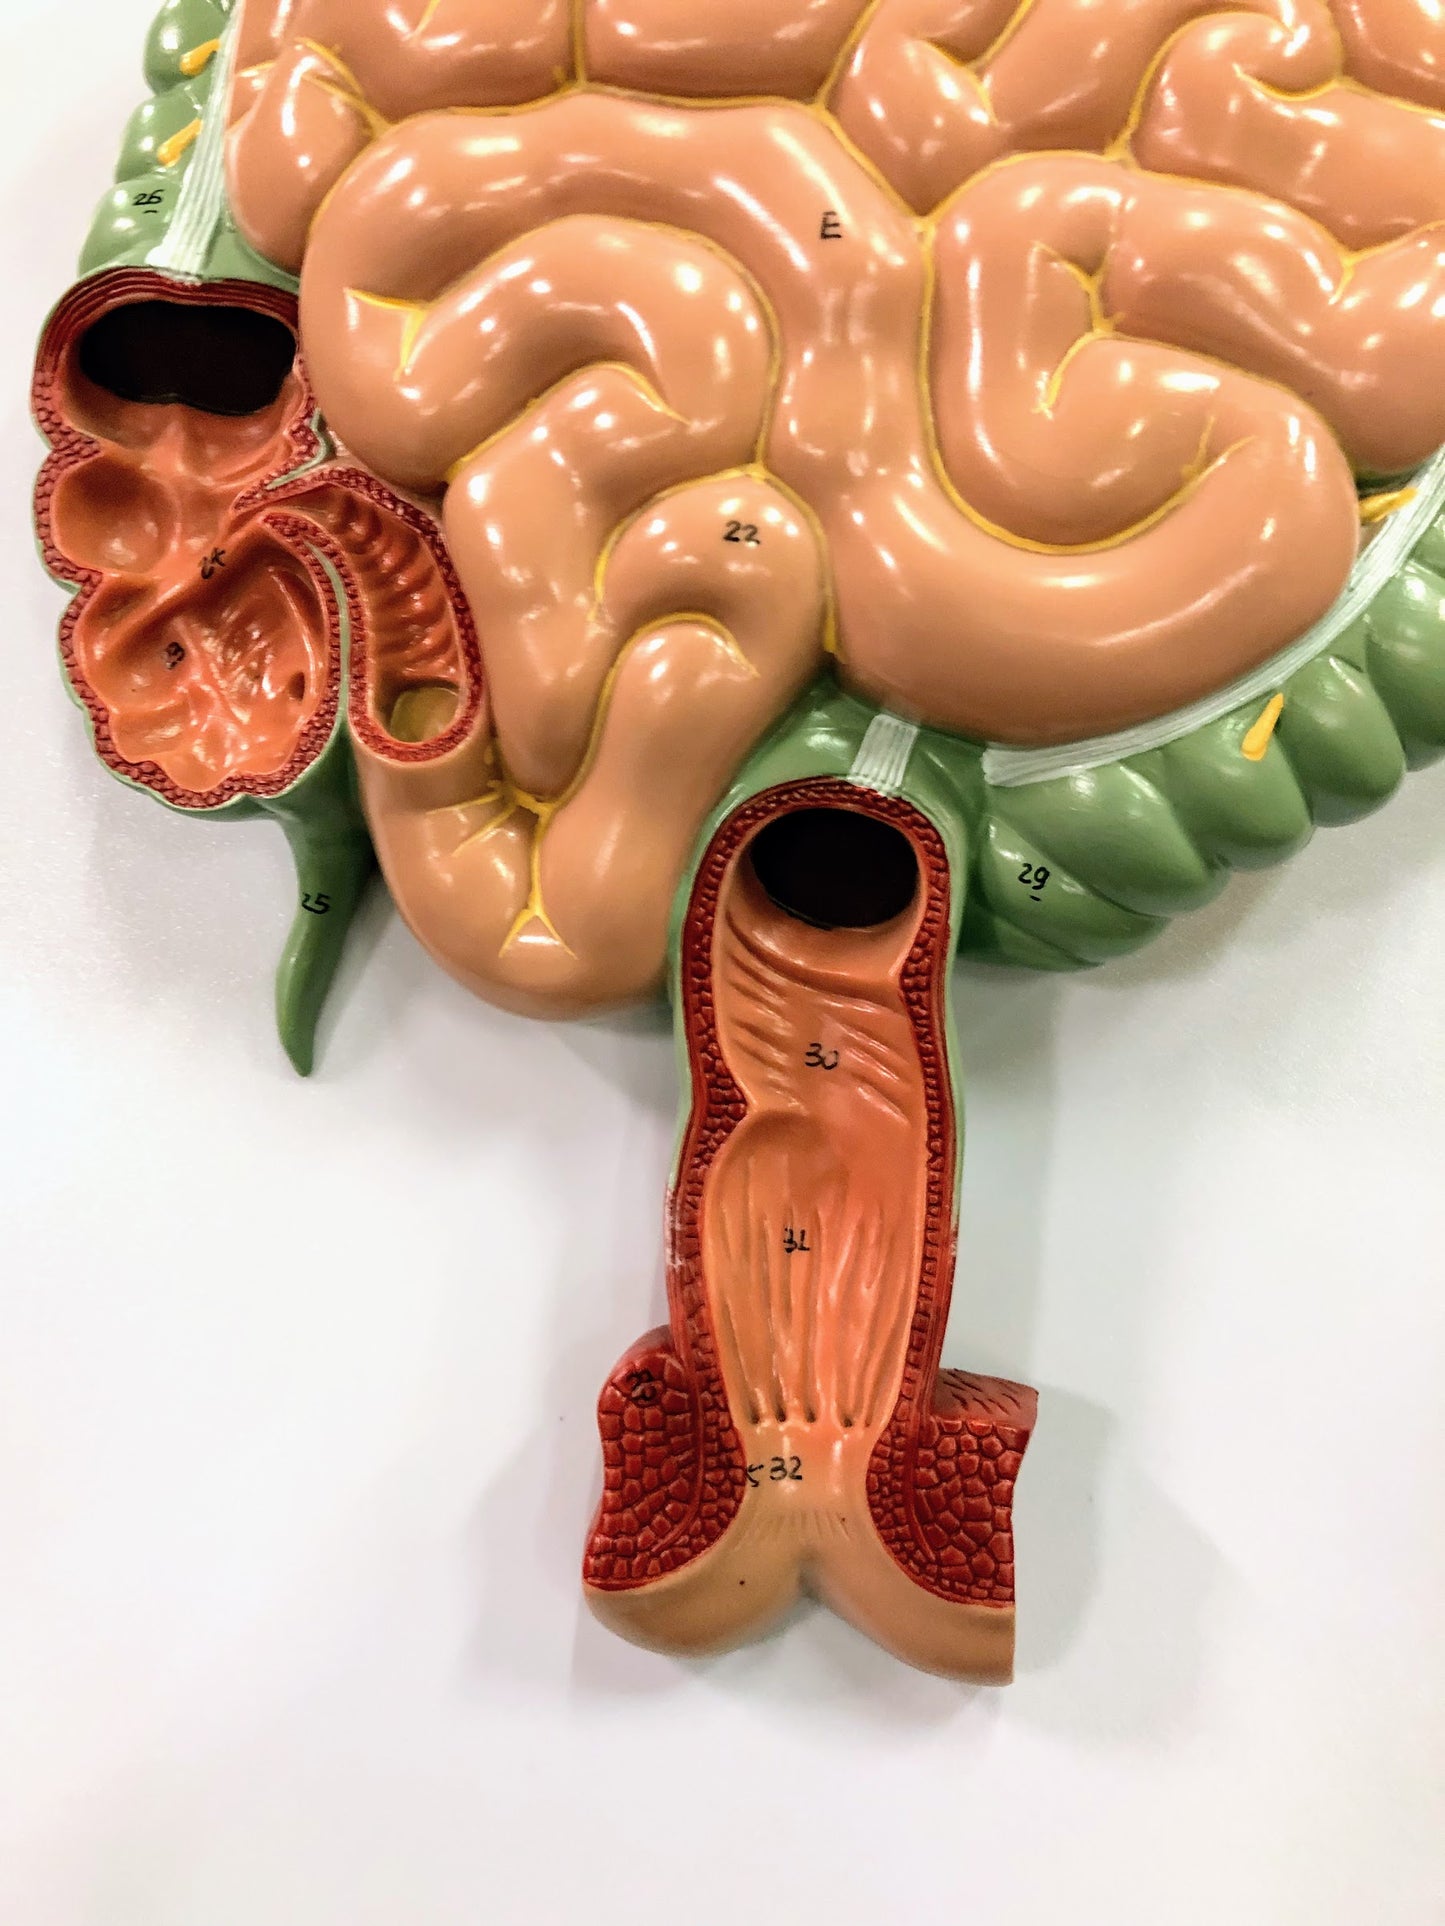 Model of the entire digestive system at 91 cm in height